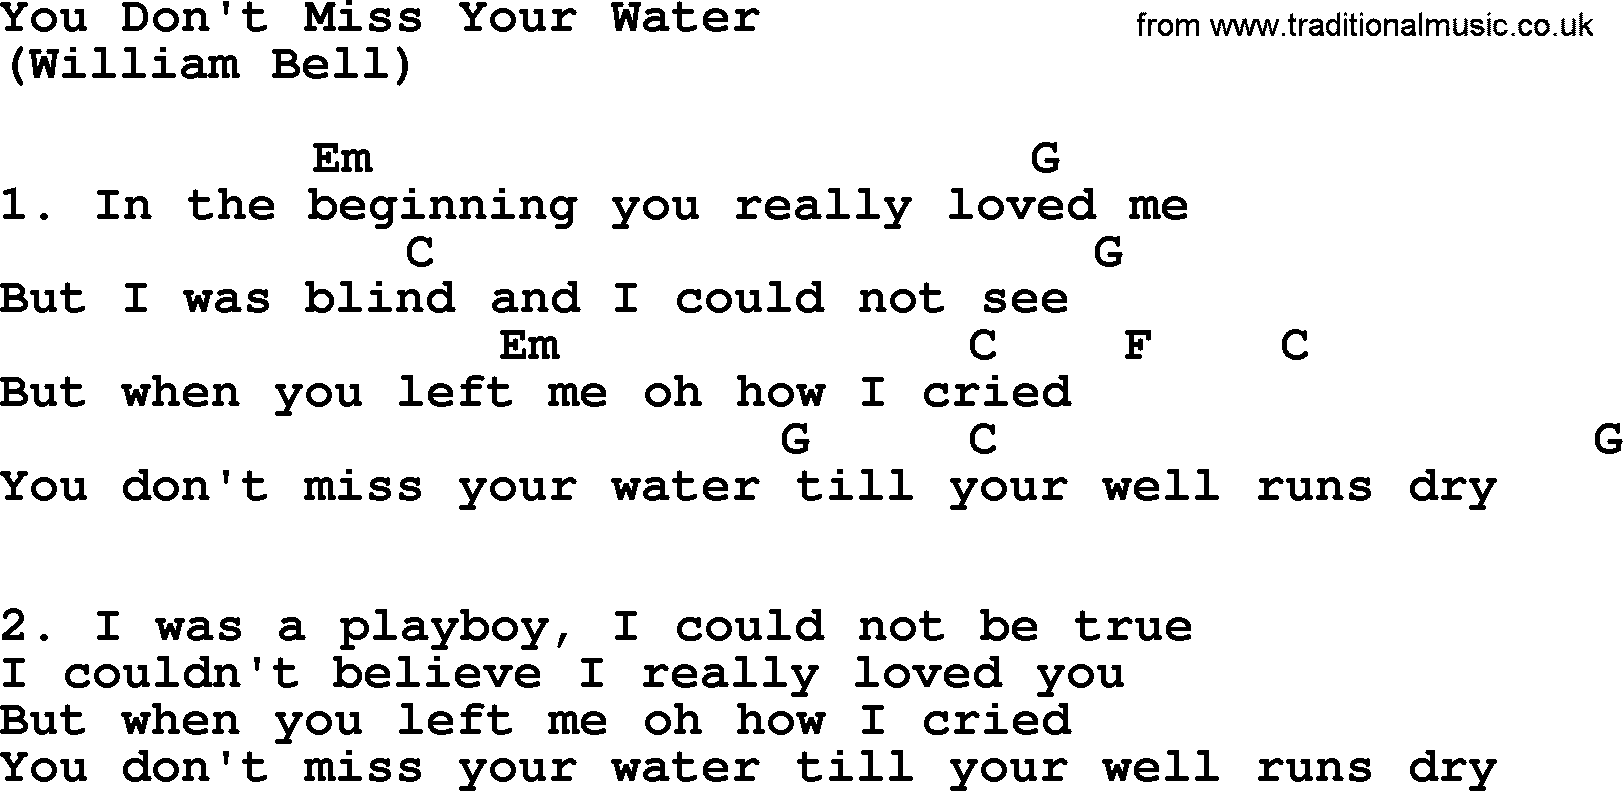 The Byrds song You Don't Miss Your Water, lyrics and chords